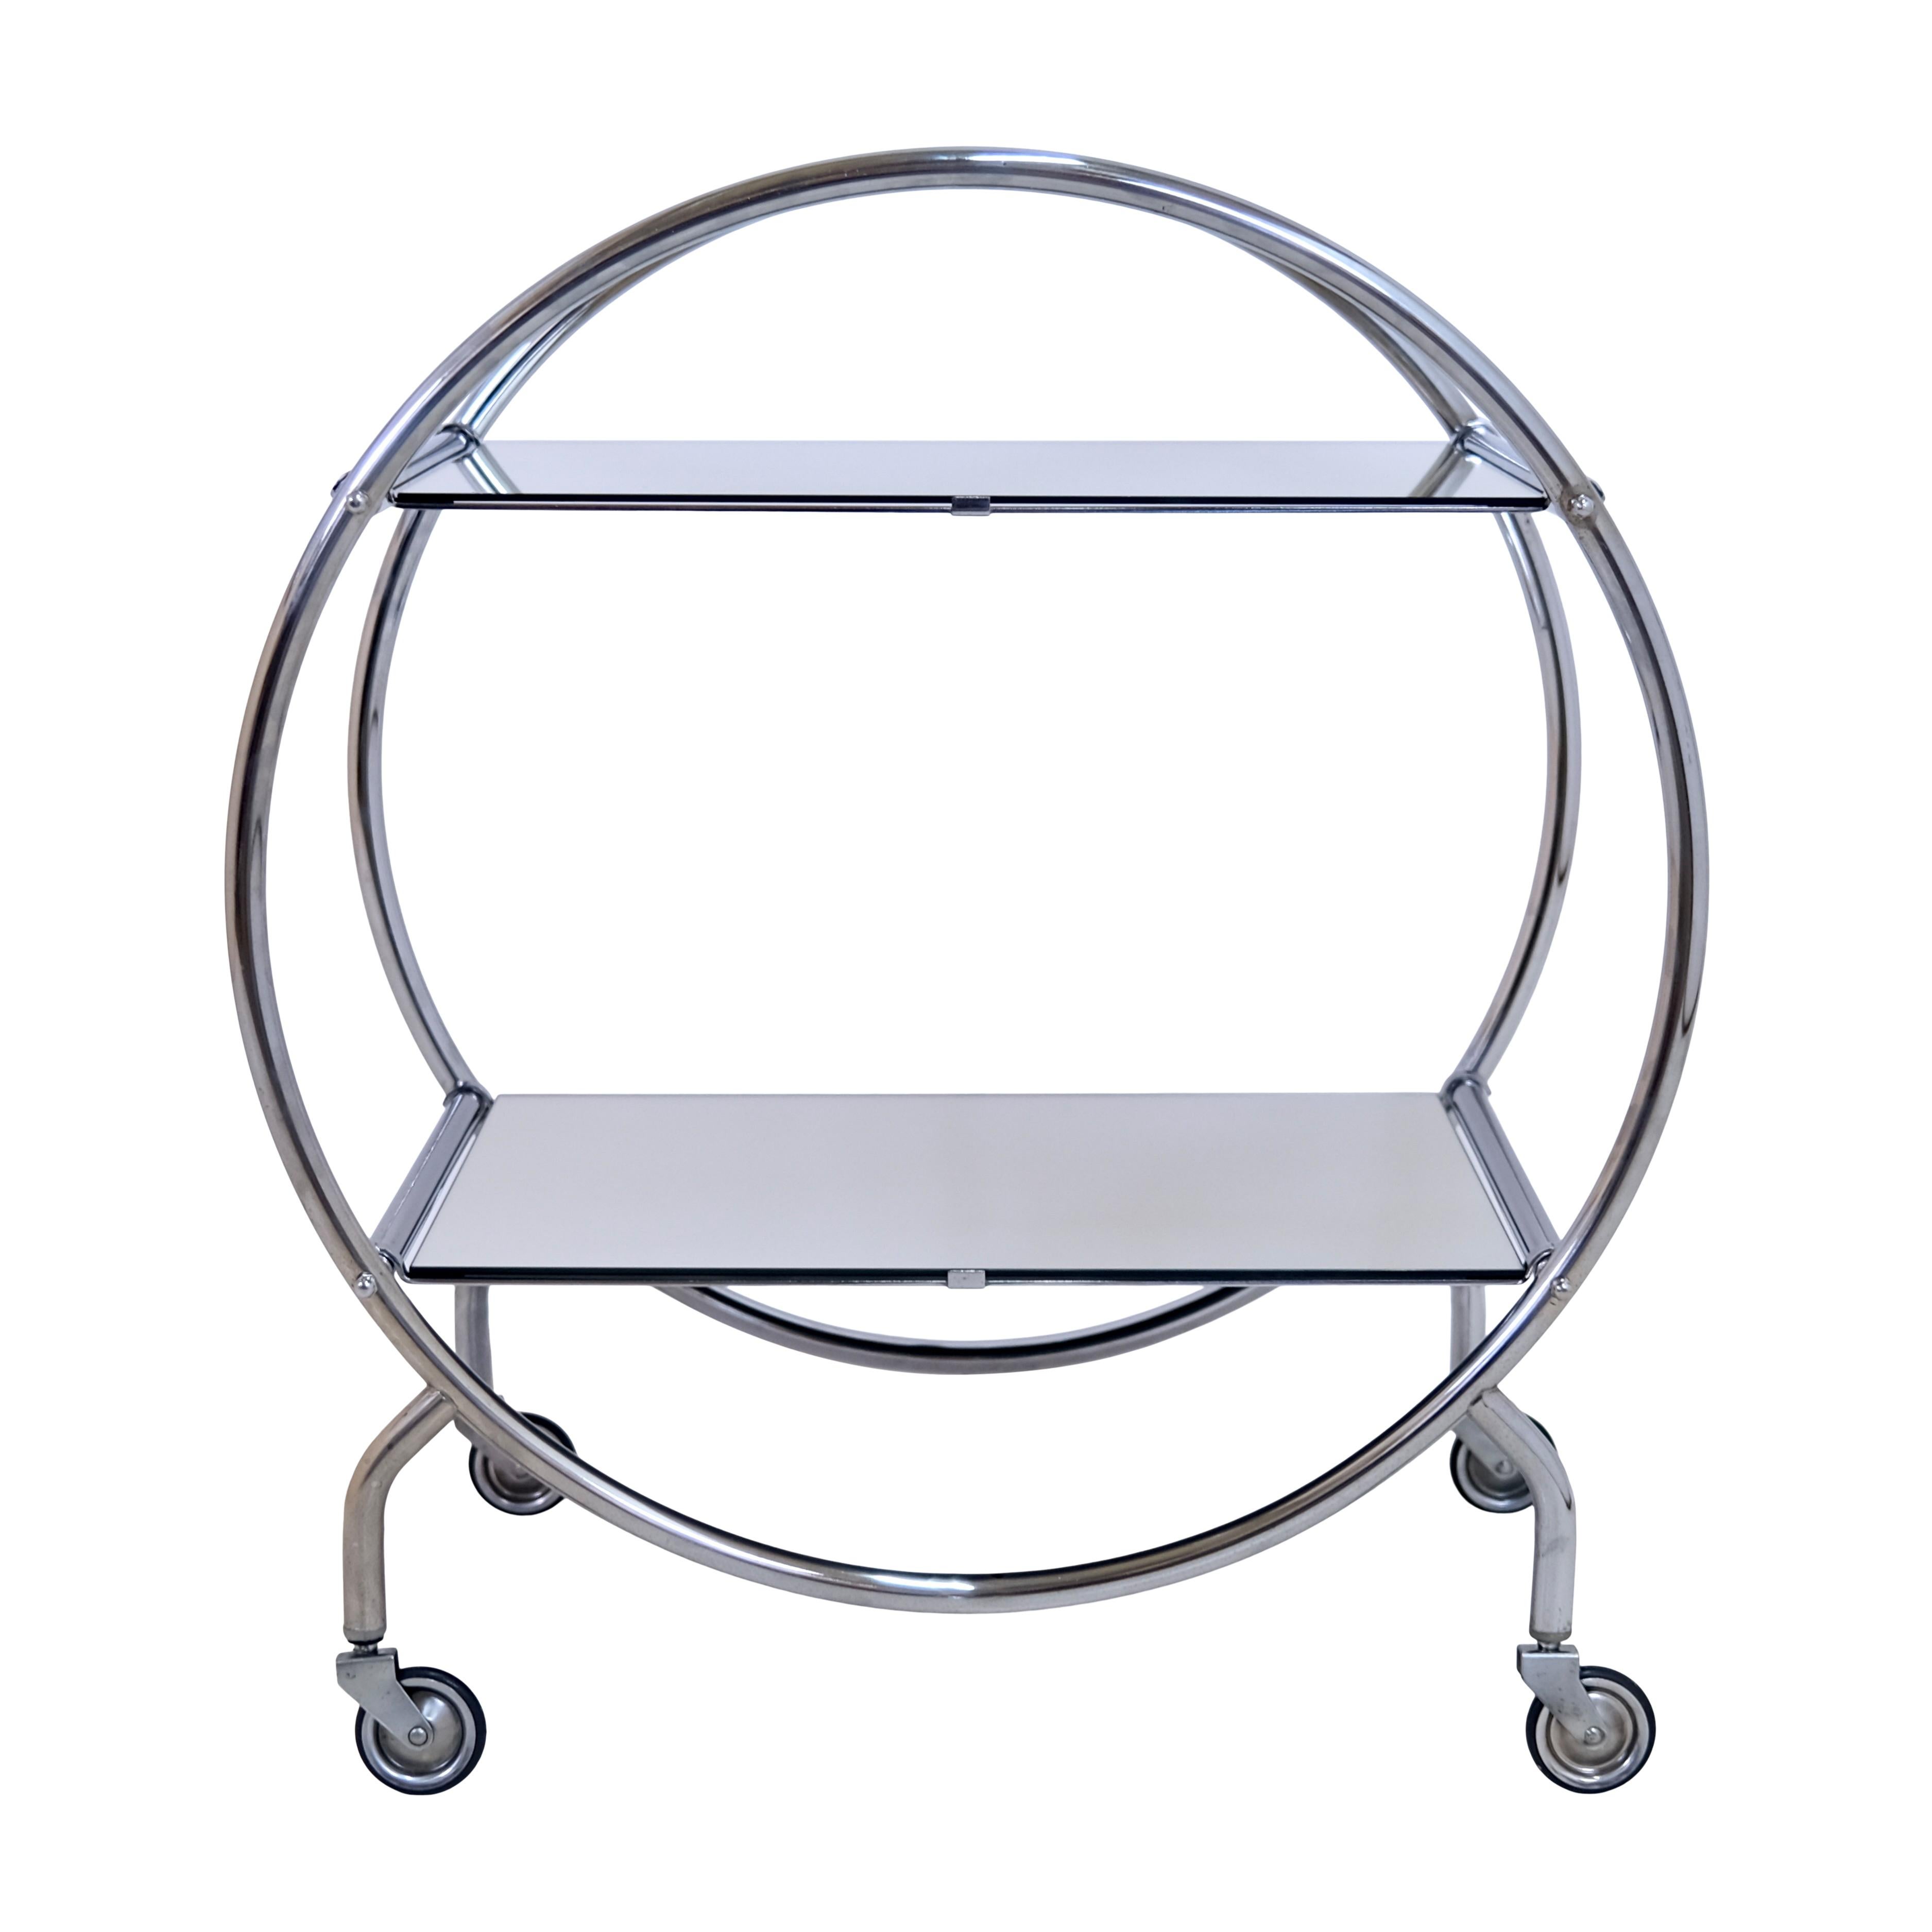 Circular bar cart
with two levels, mirrored
Original chrome plating

Mid Century, England 1950s

Dimensions:
Width: 68 cm
height: 77 cm
Depth: 45 cm.